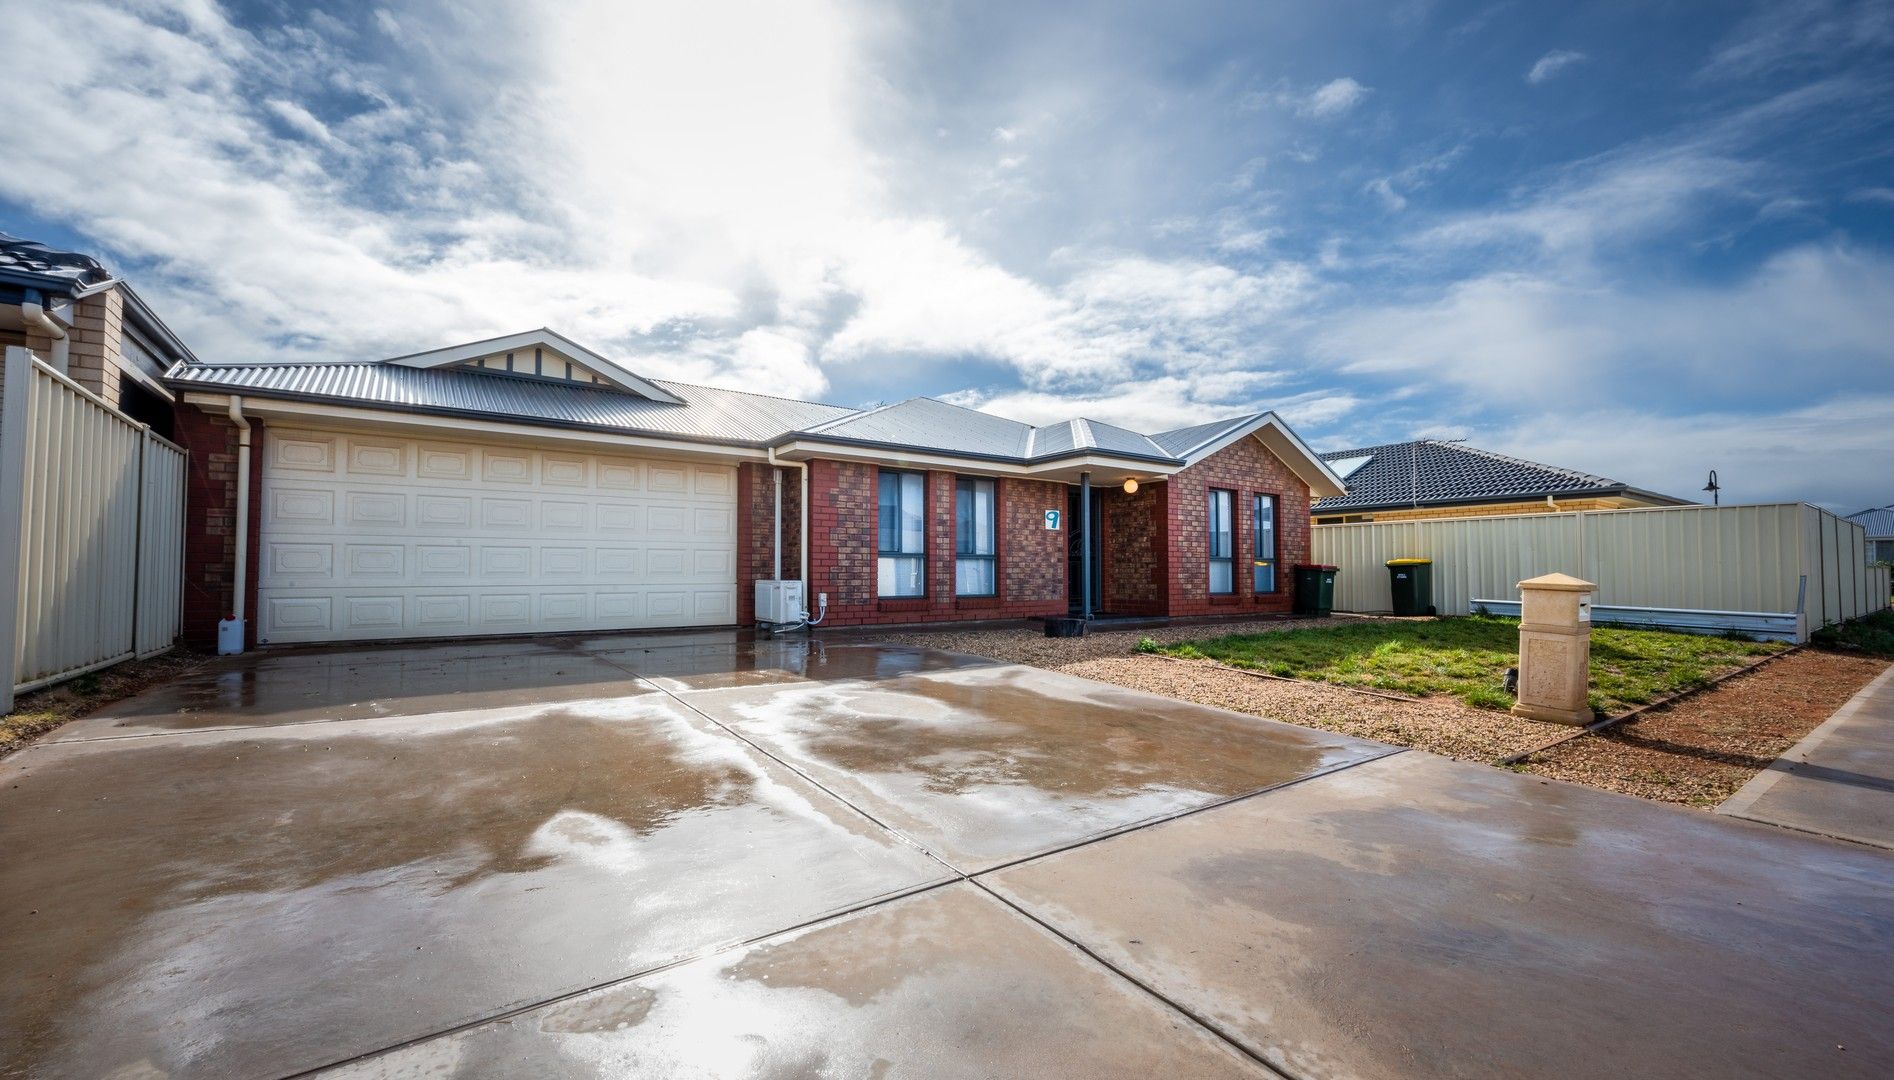 9 NEIL KERLEY COURT, Whyalla Norrie SA 5608, Image 0